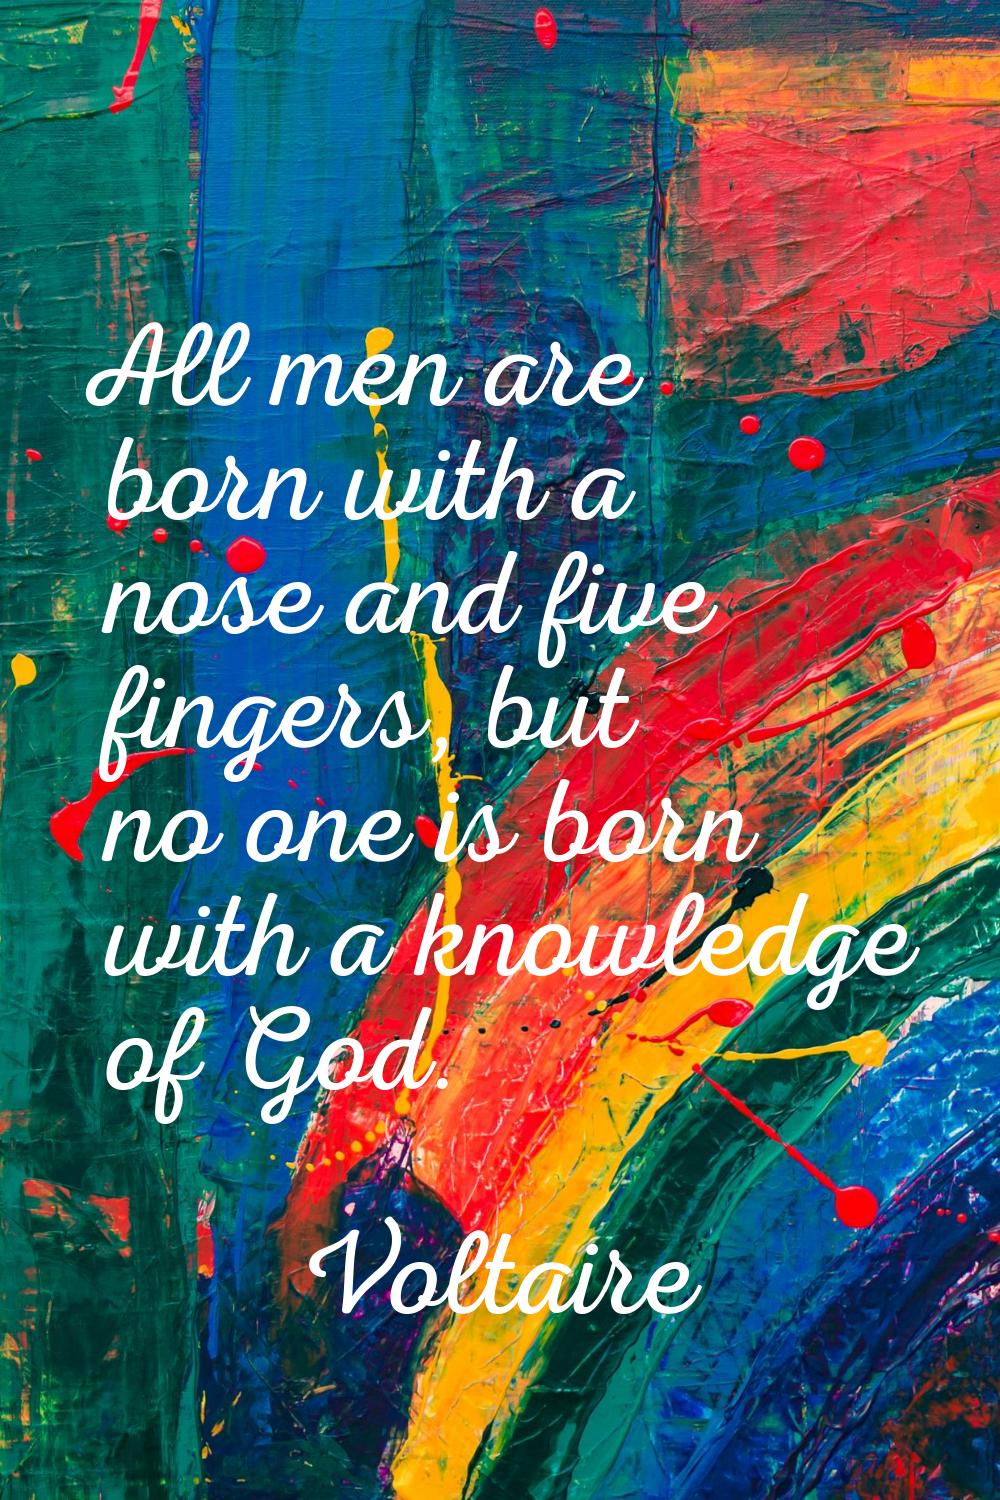 All men are born with a nose and five fingers, but no one is born with a knowledge of God.